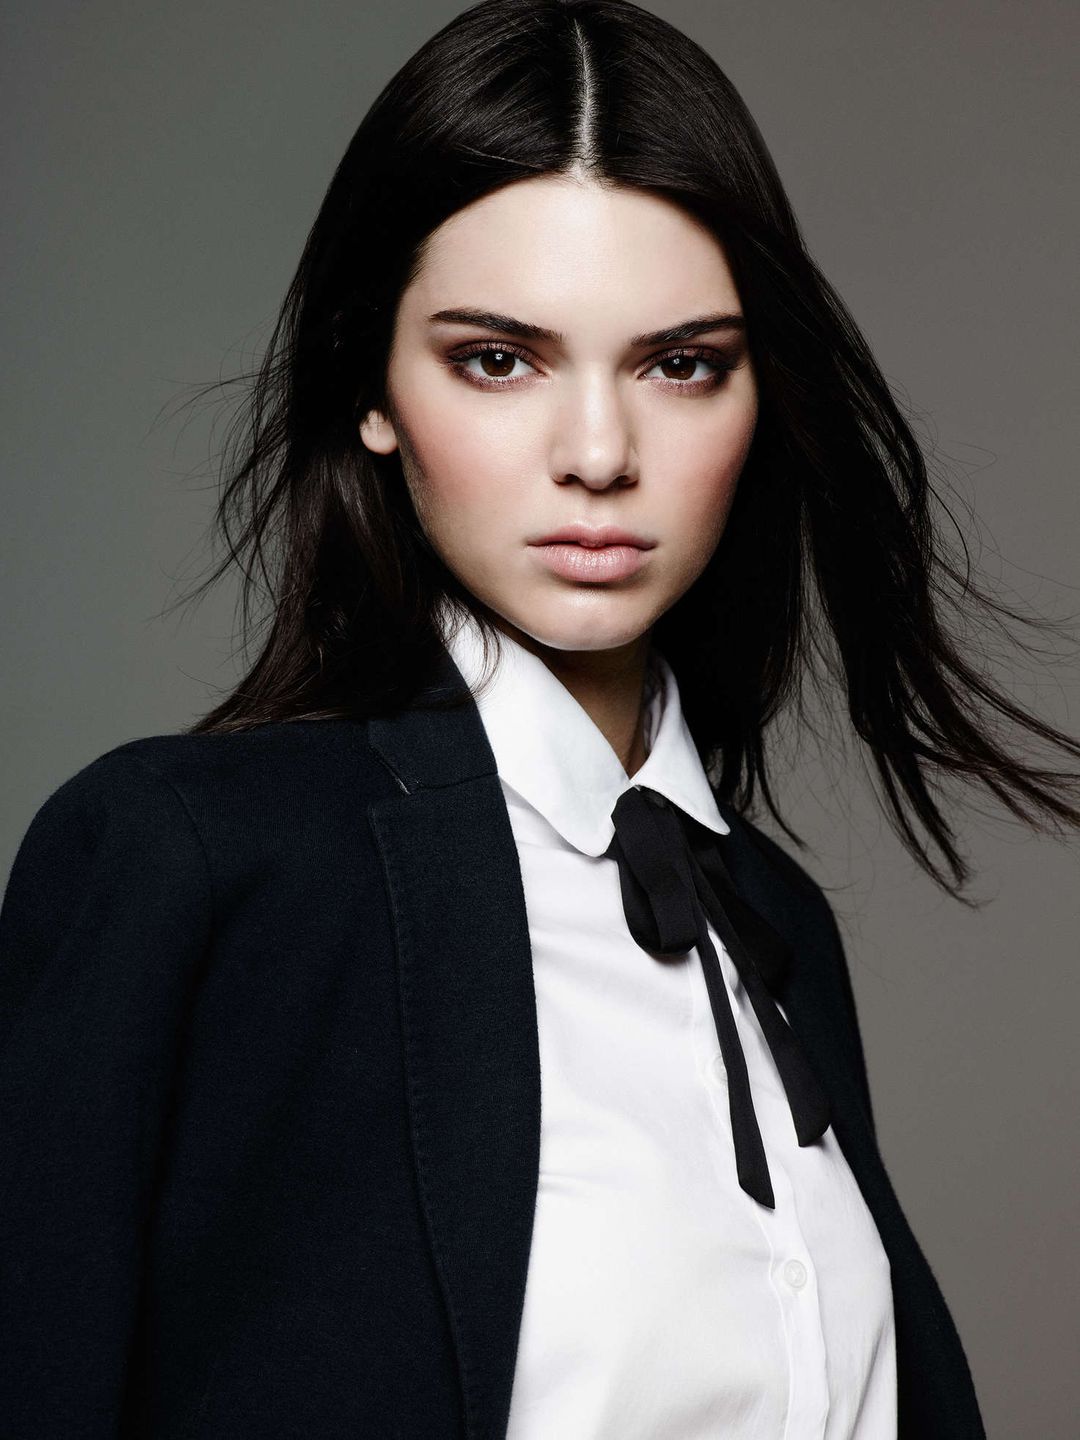 Kendall Jenner interesting facts